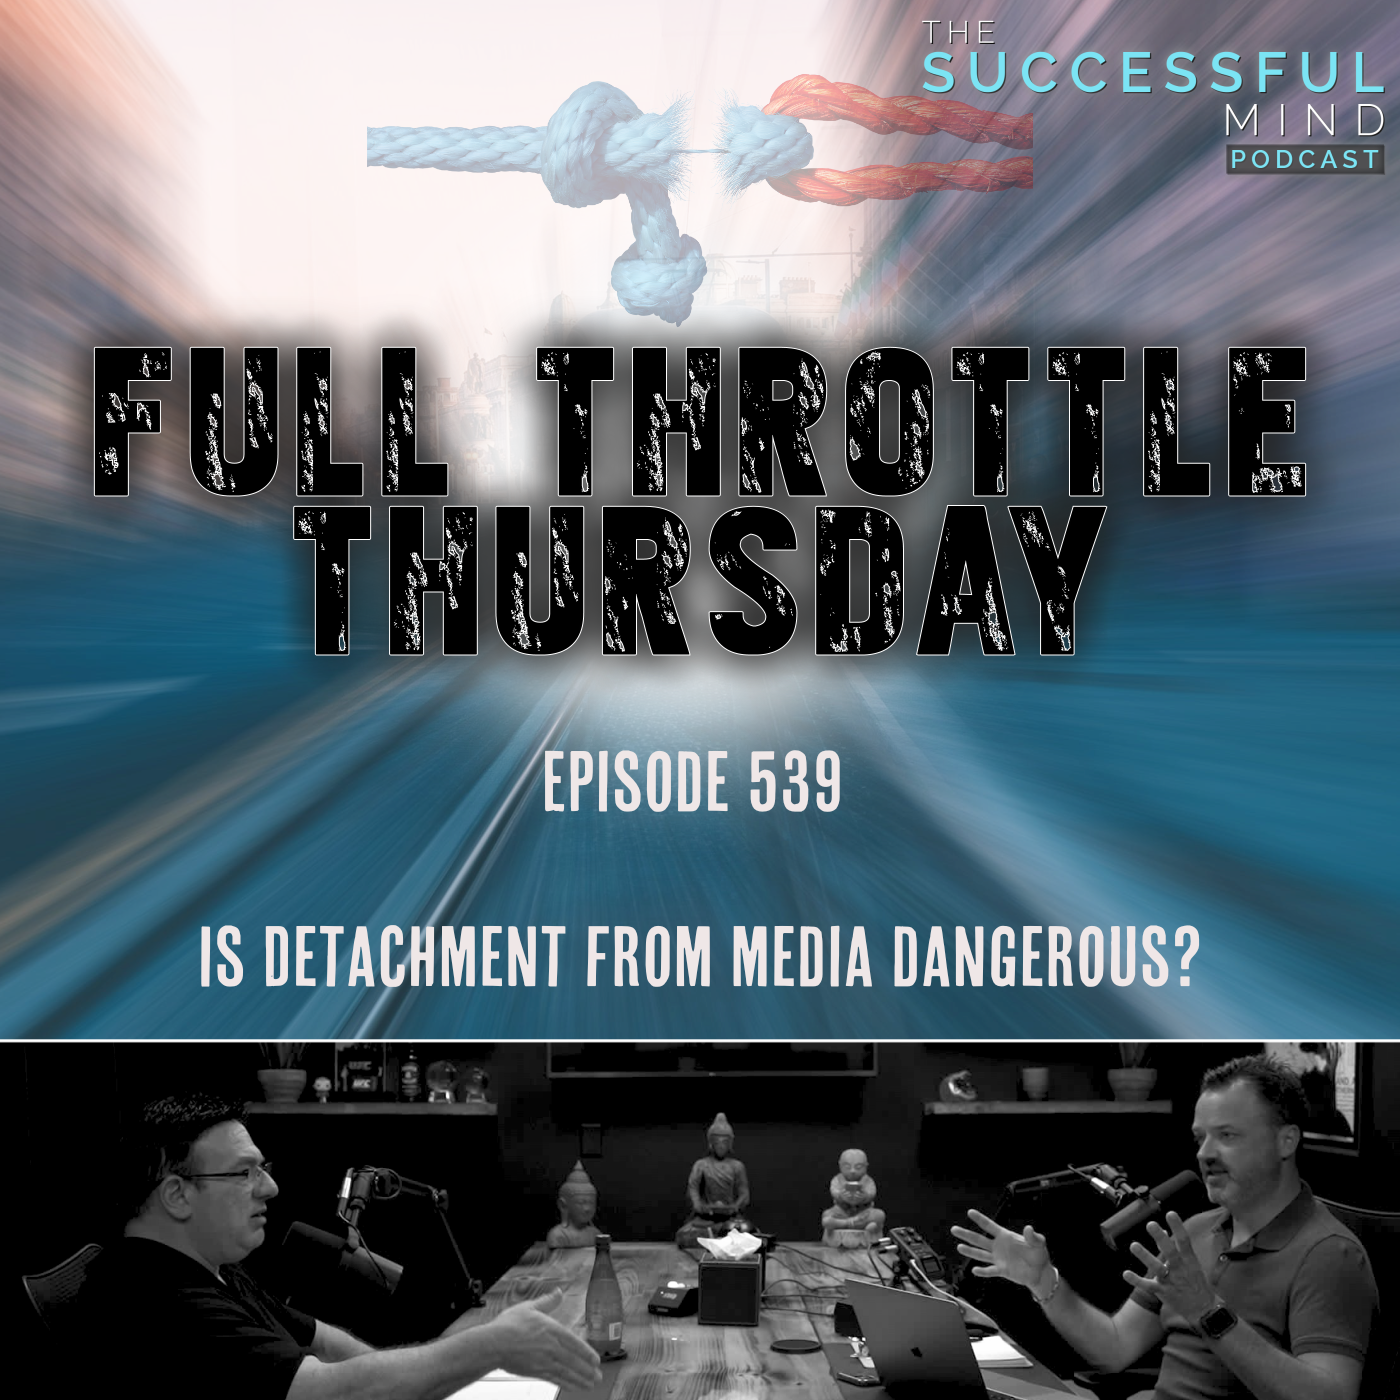 The Successful Mind Podcast - Full Throttle Thursday - Is Detachment From Media Dangerous?